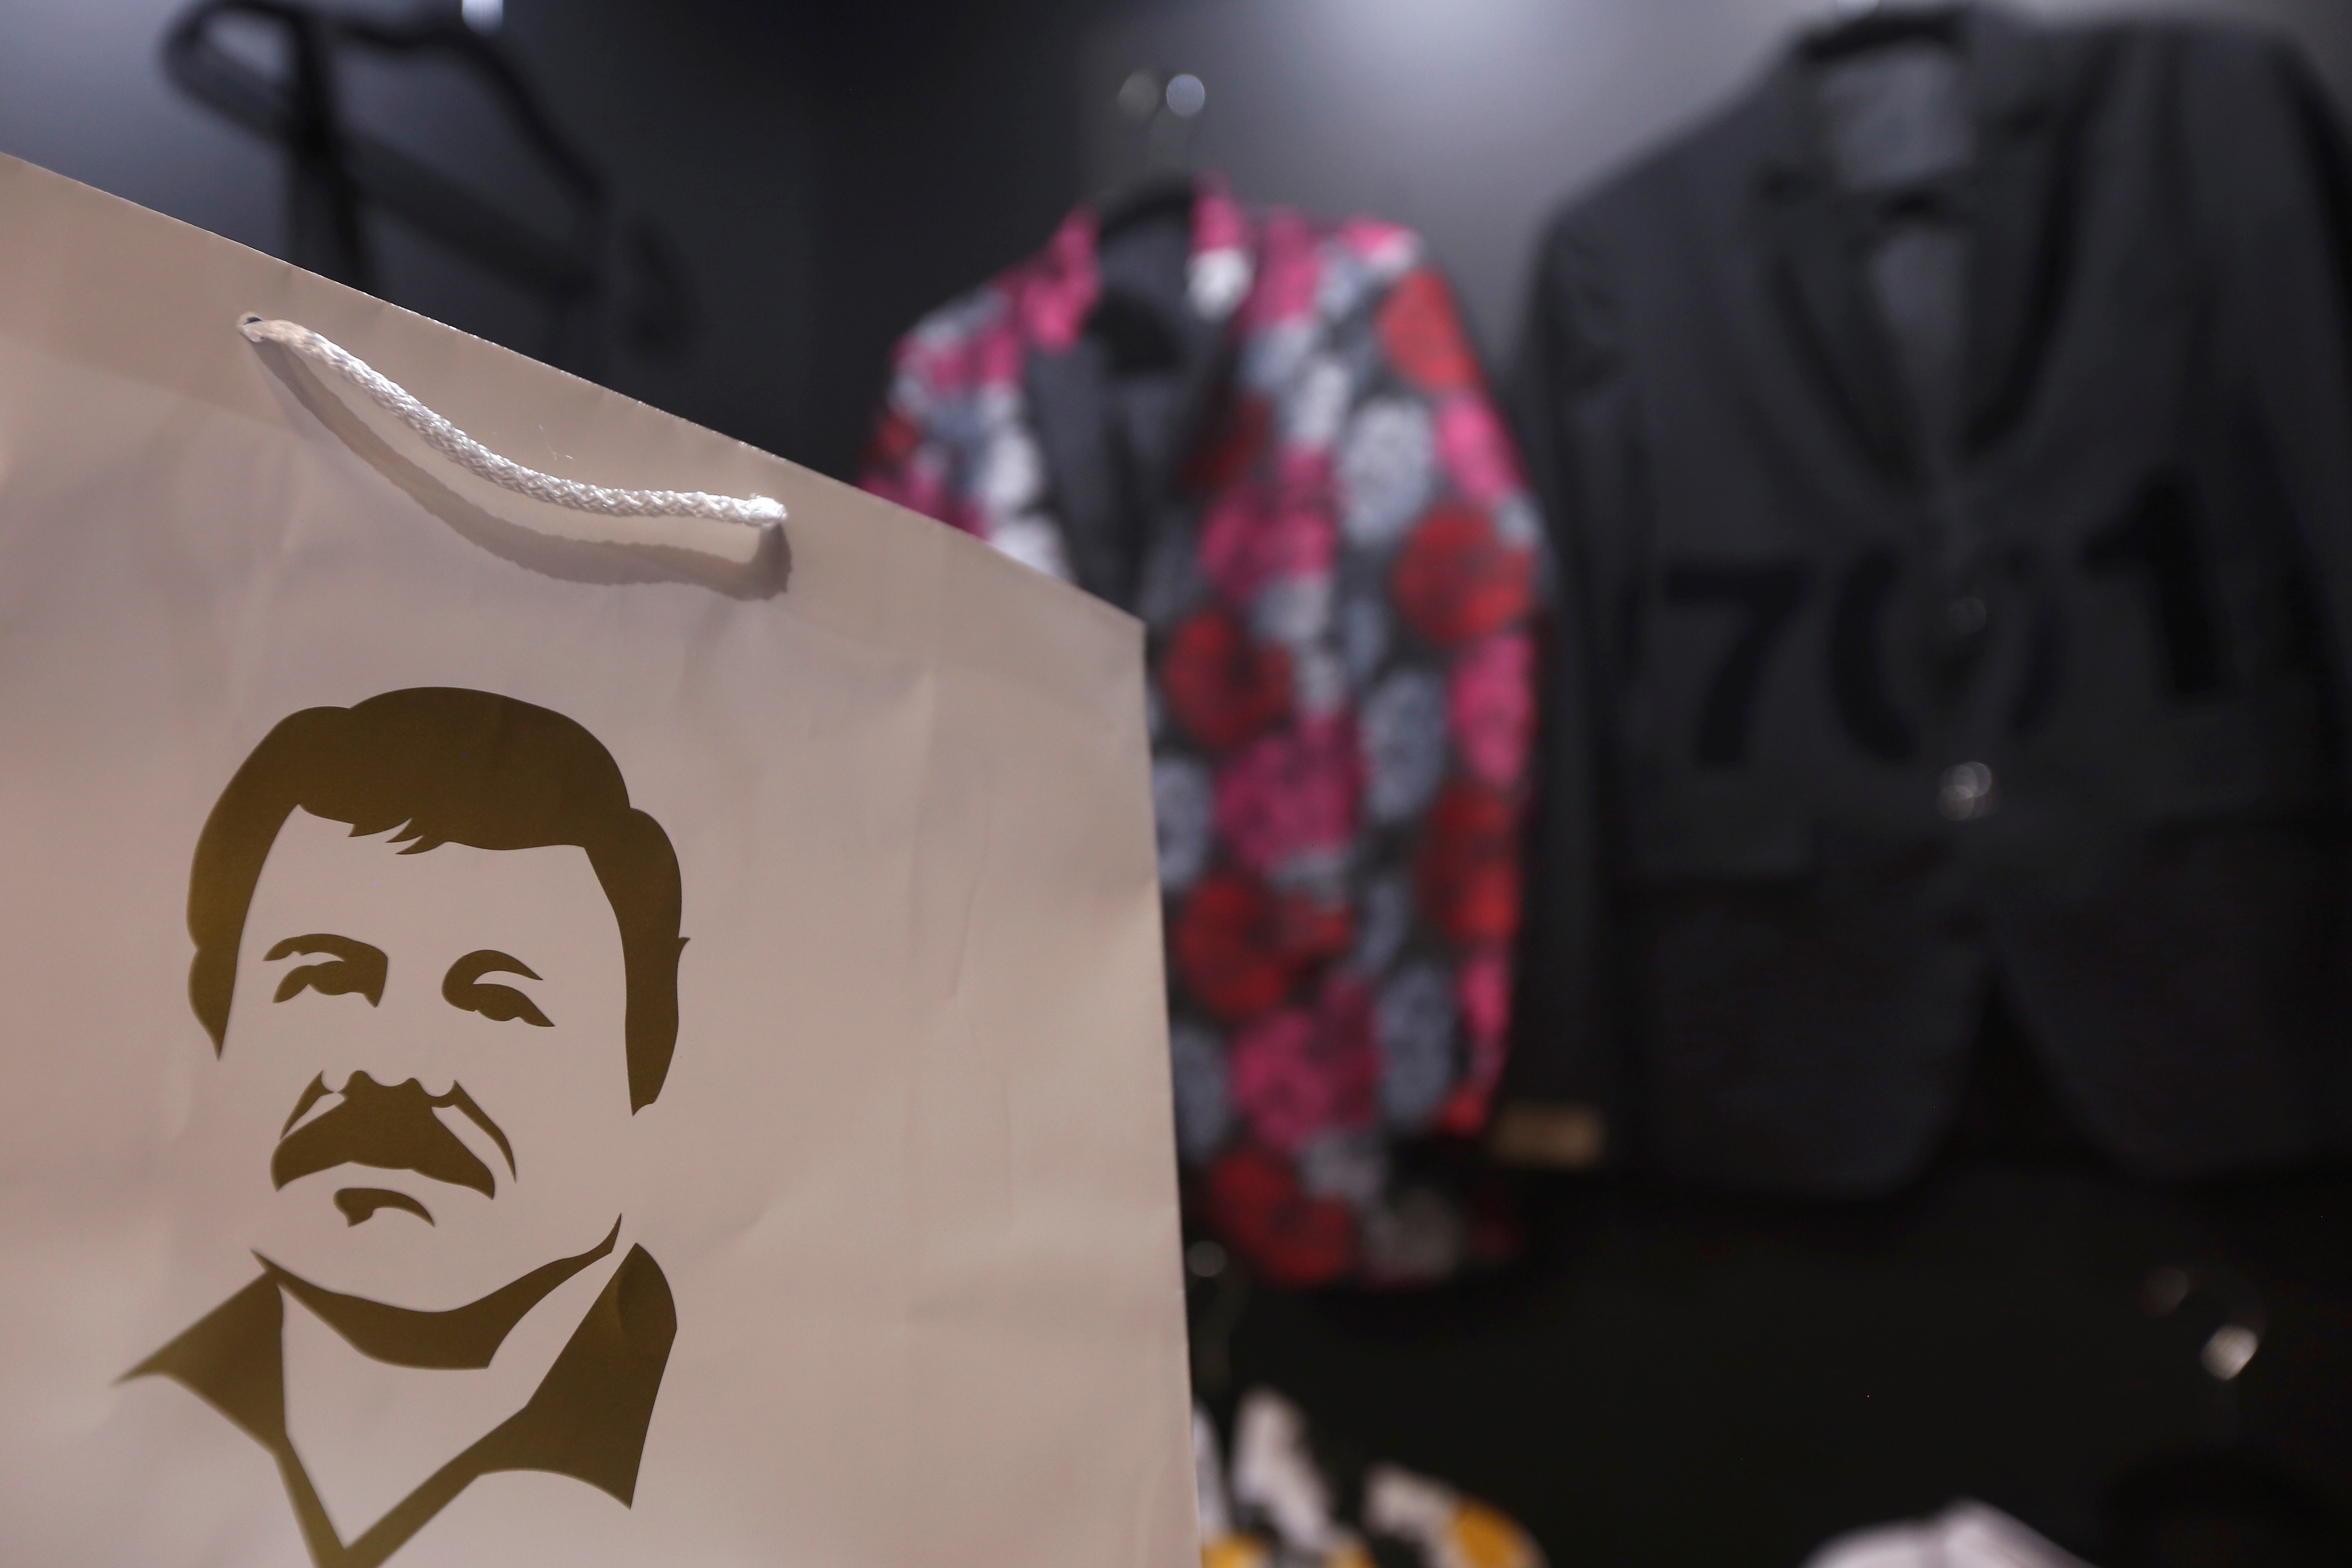 A paper bag with the image of Mexican drug lord Joaquin 